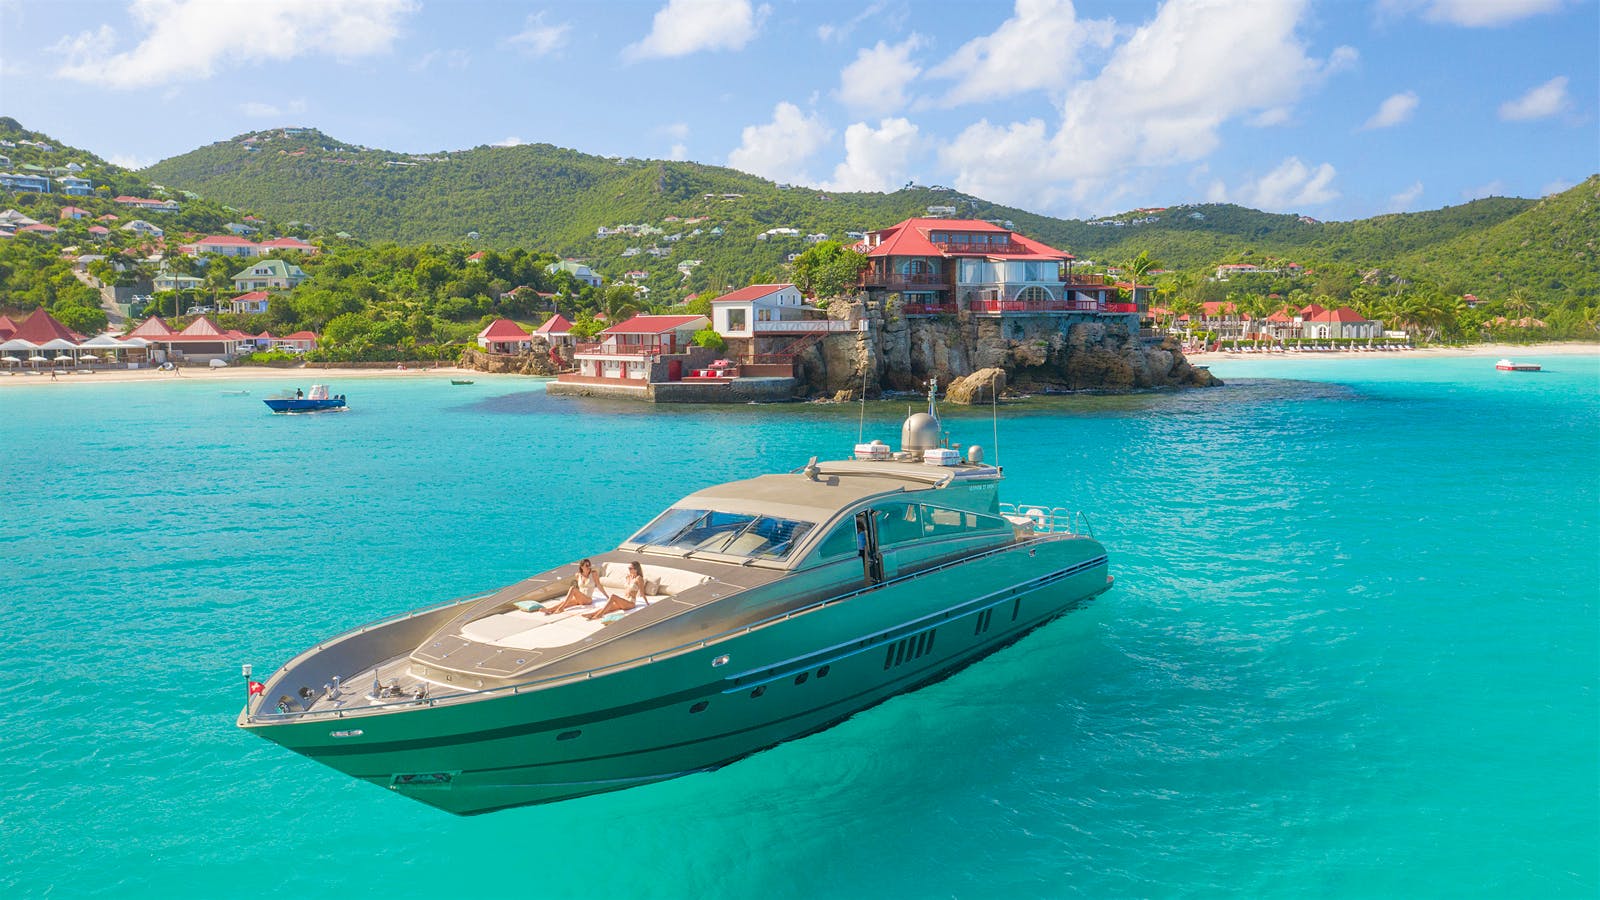 St Barths packed with billionaires' yachts and celebs as the winter  hang-out